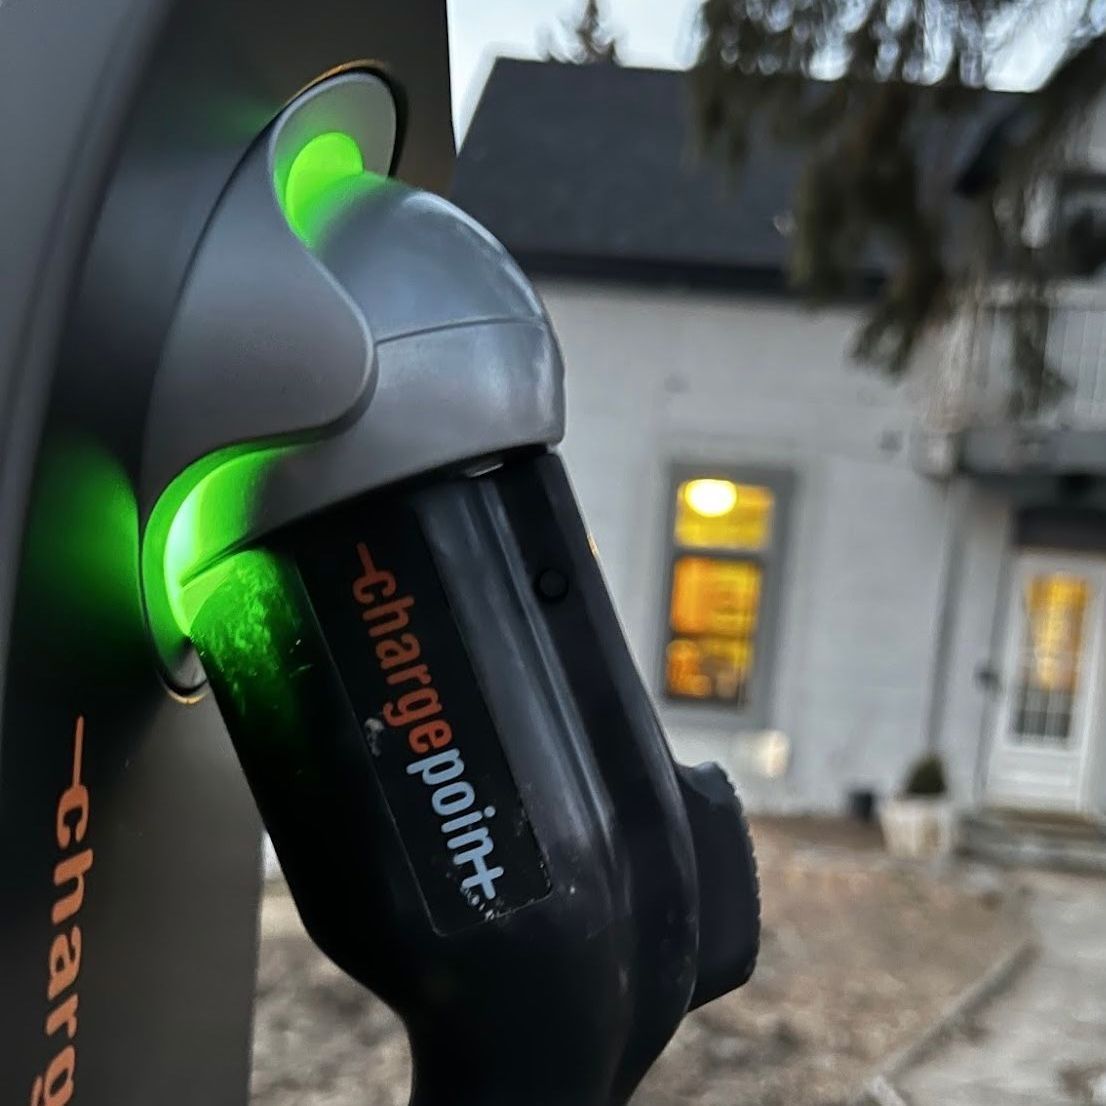 a charging station that says chargepoint on it